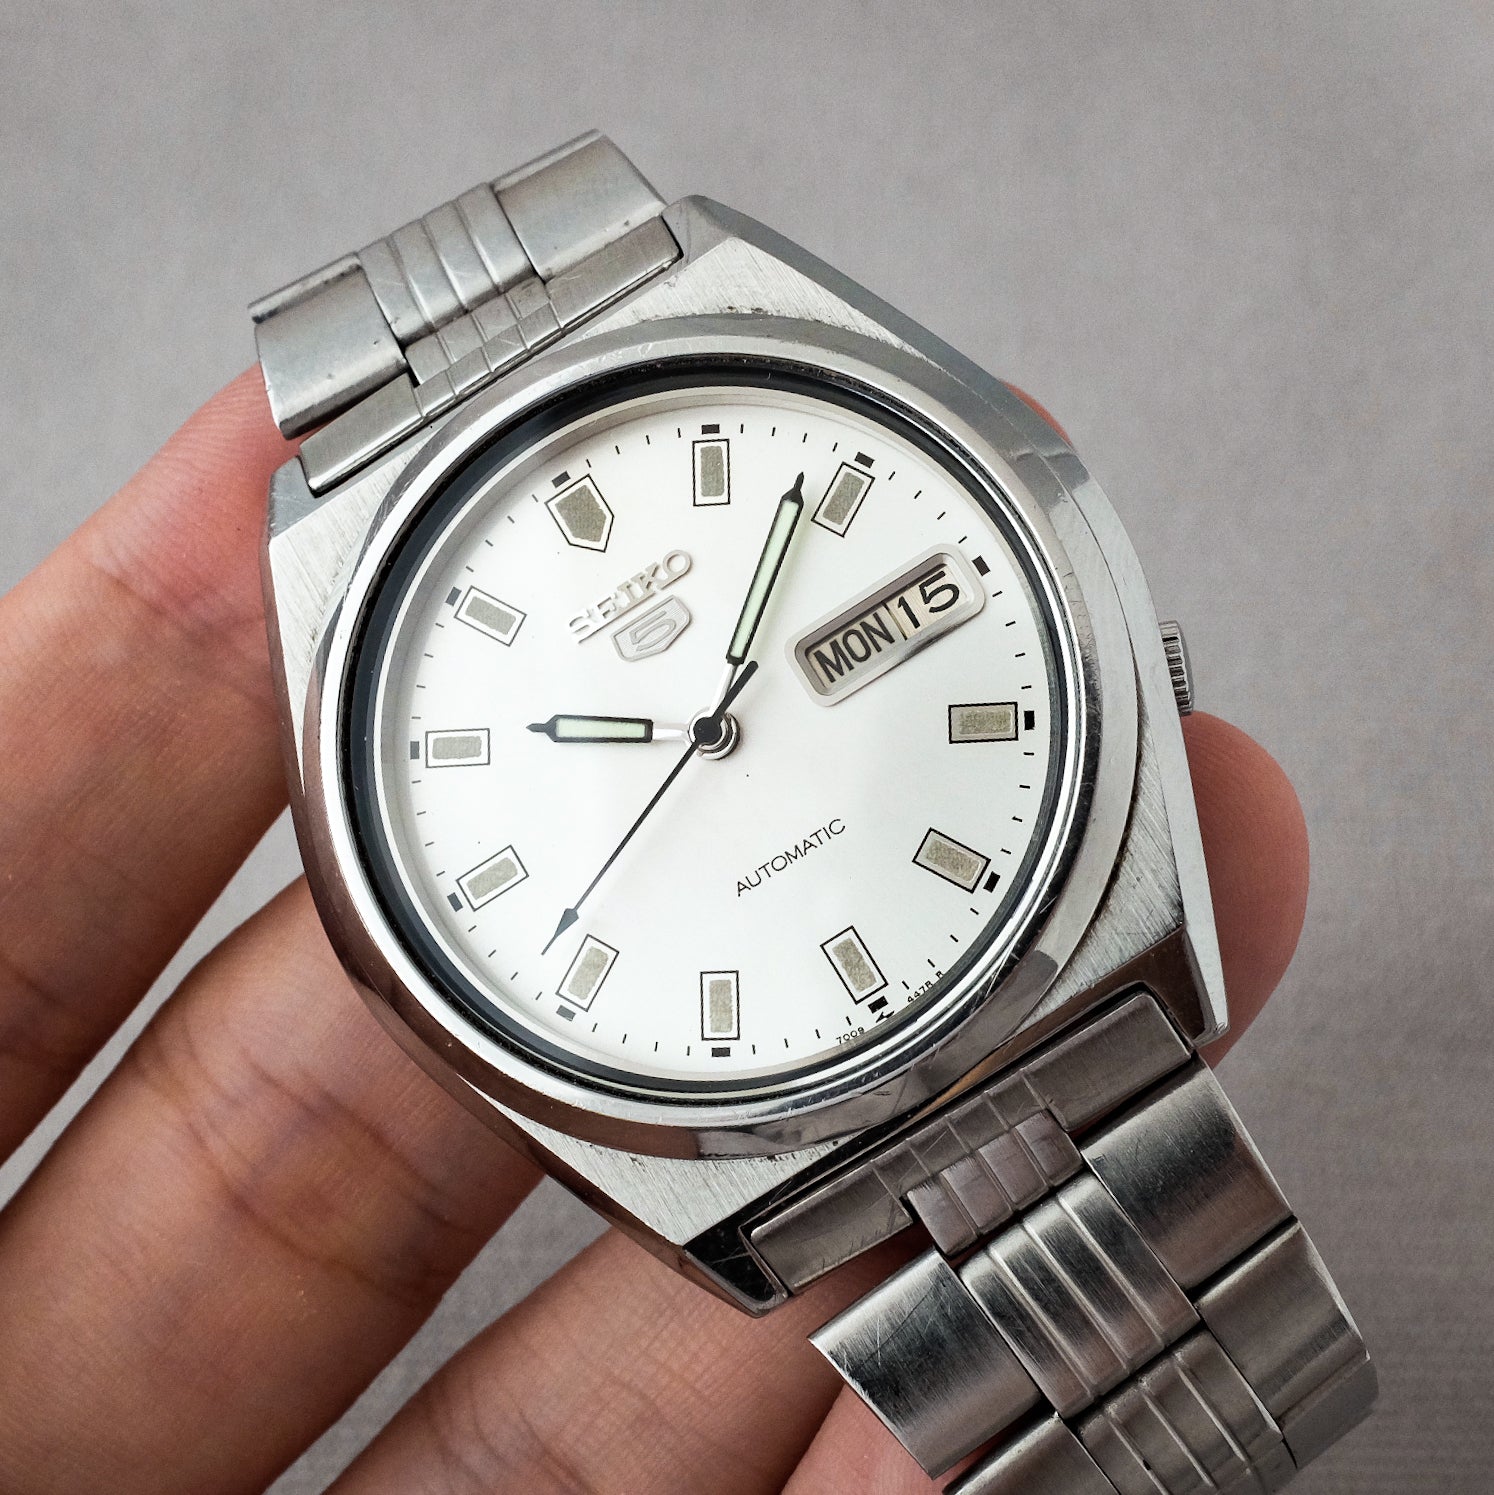 Seiko 7009-876A from 1989